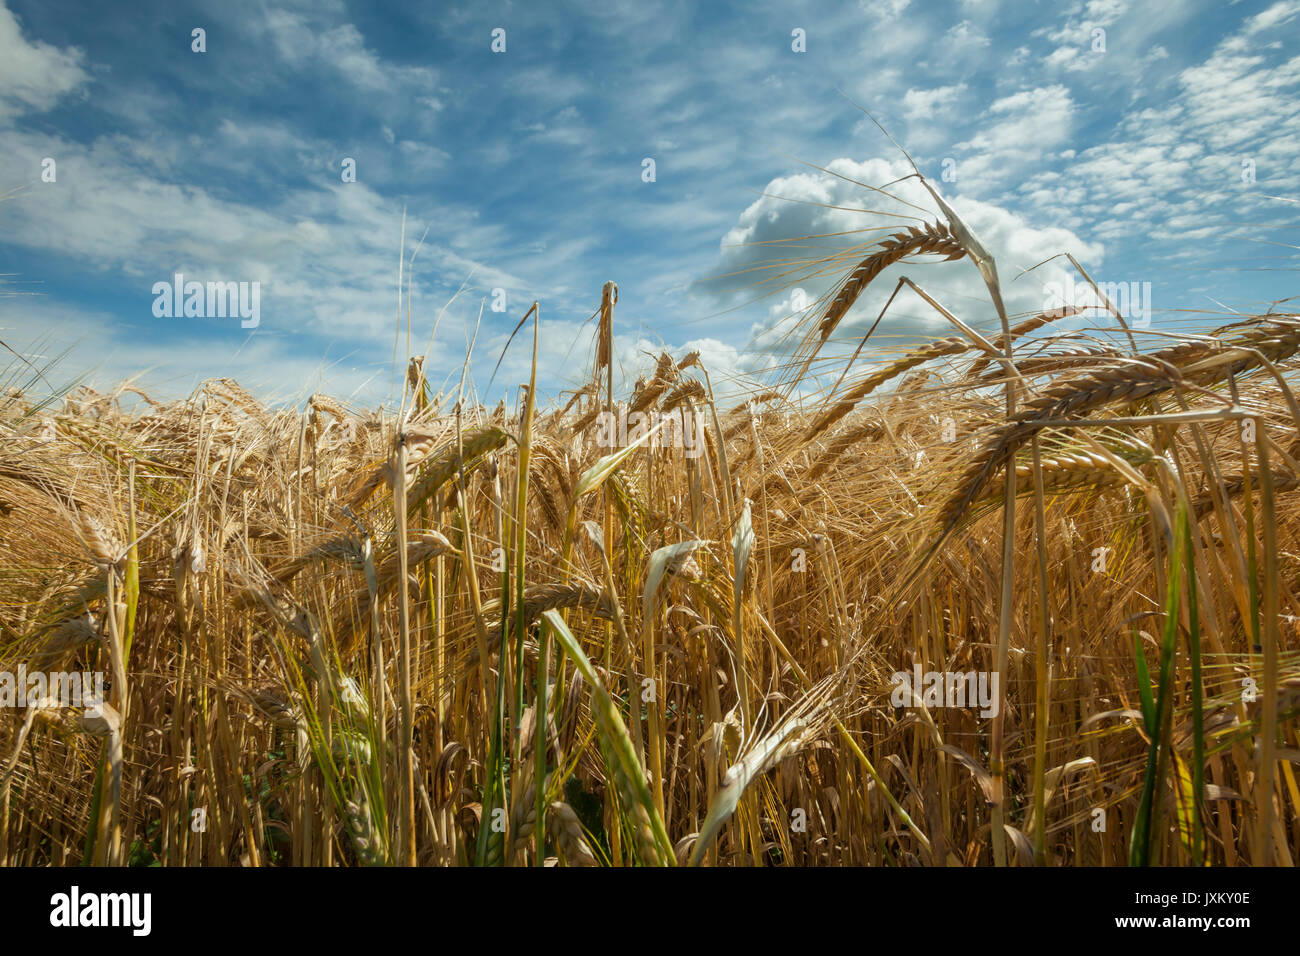 Barley field in South Downs National Park, West Sussex, England. Stock Photo